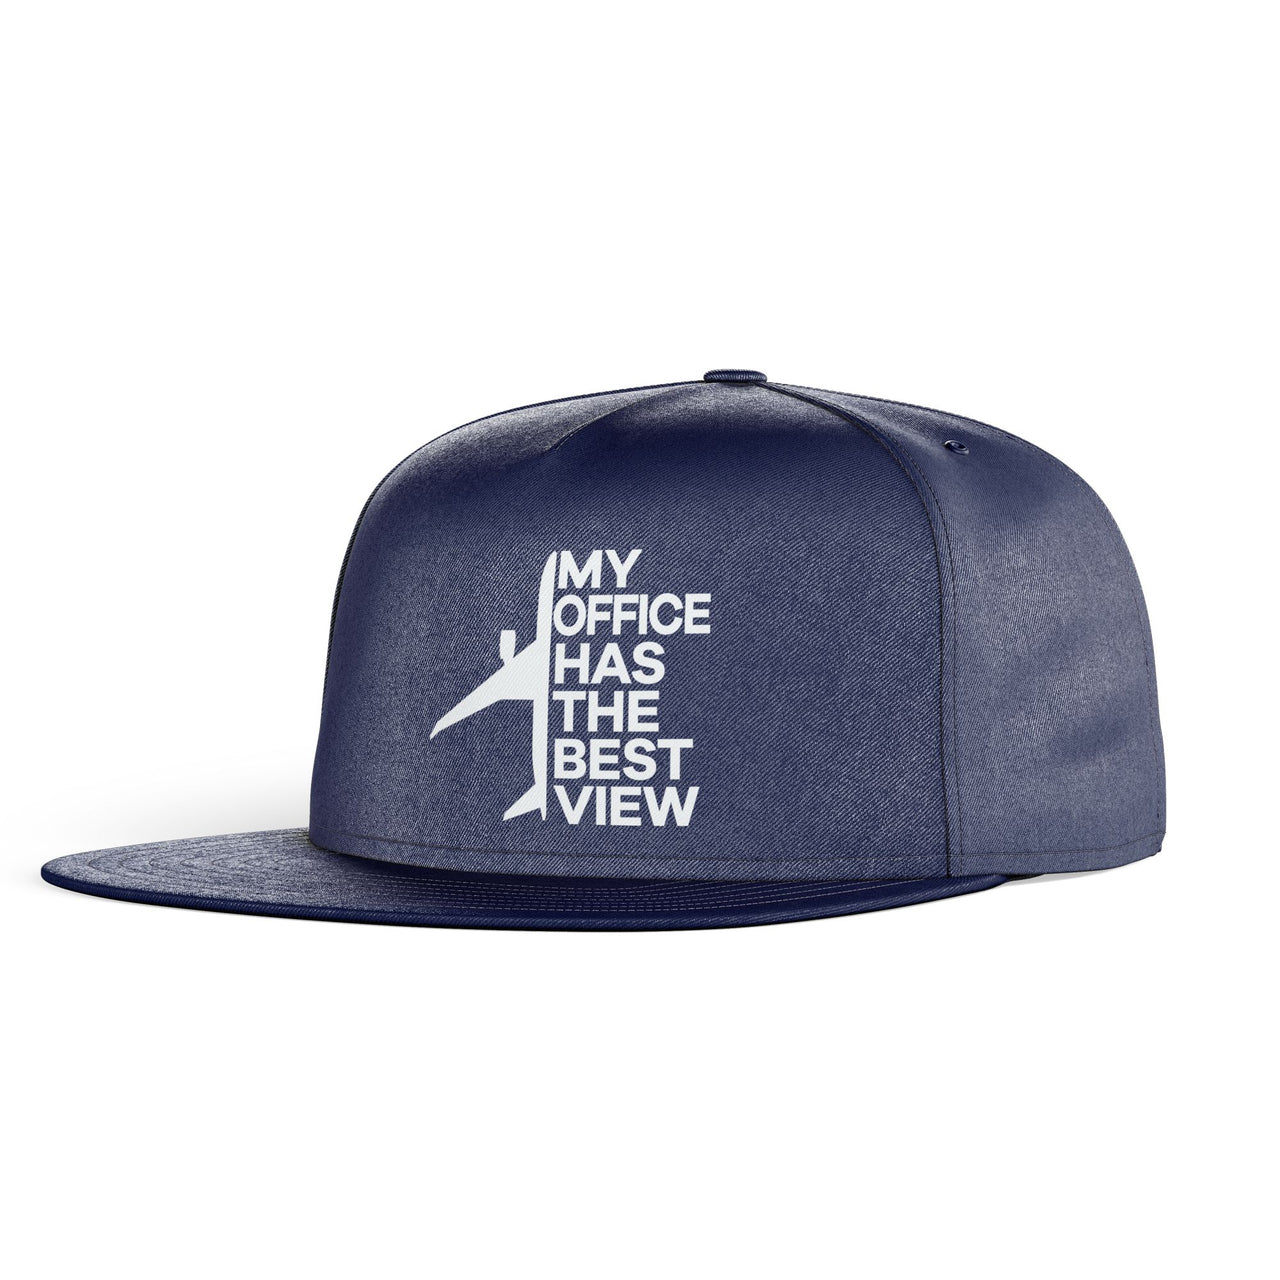 My Office Has The Best View Designed Snapback Caps & Hats